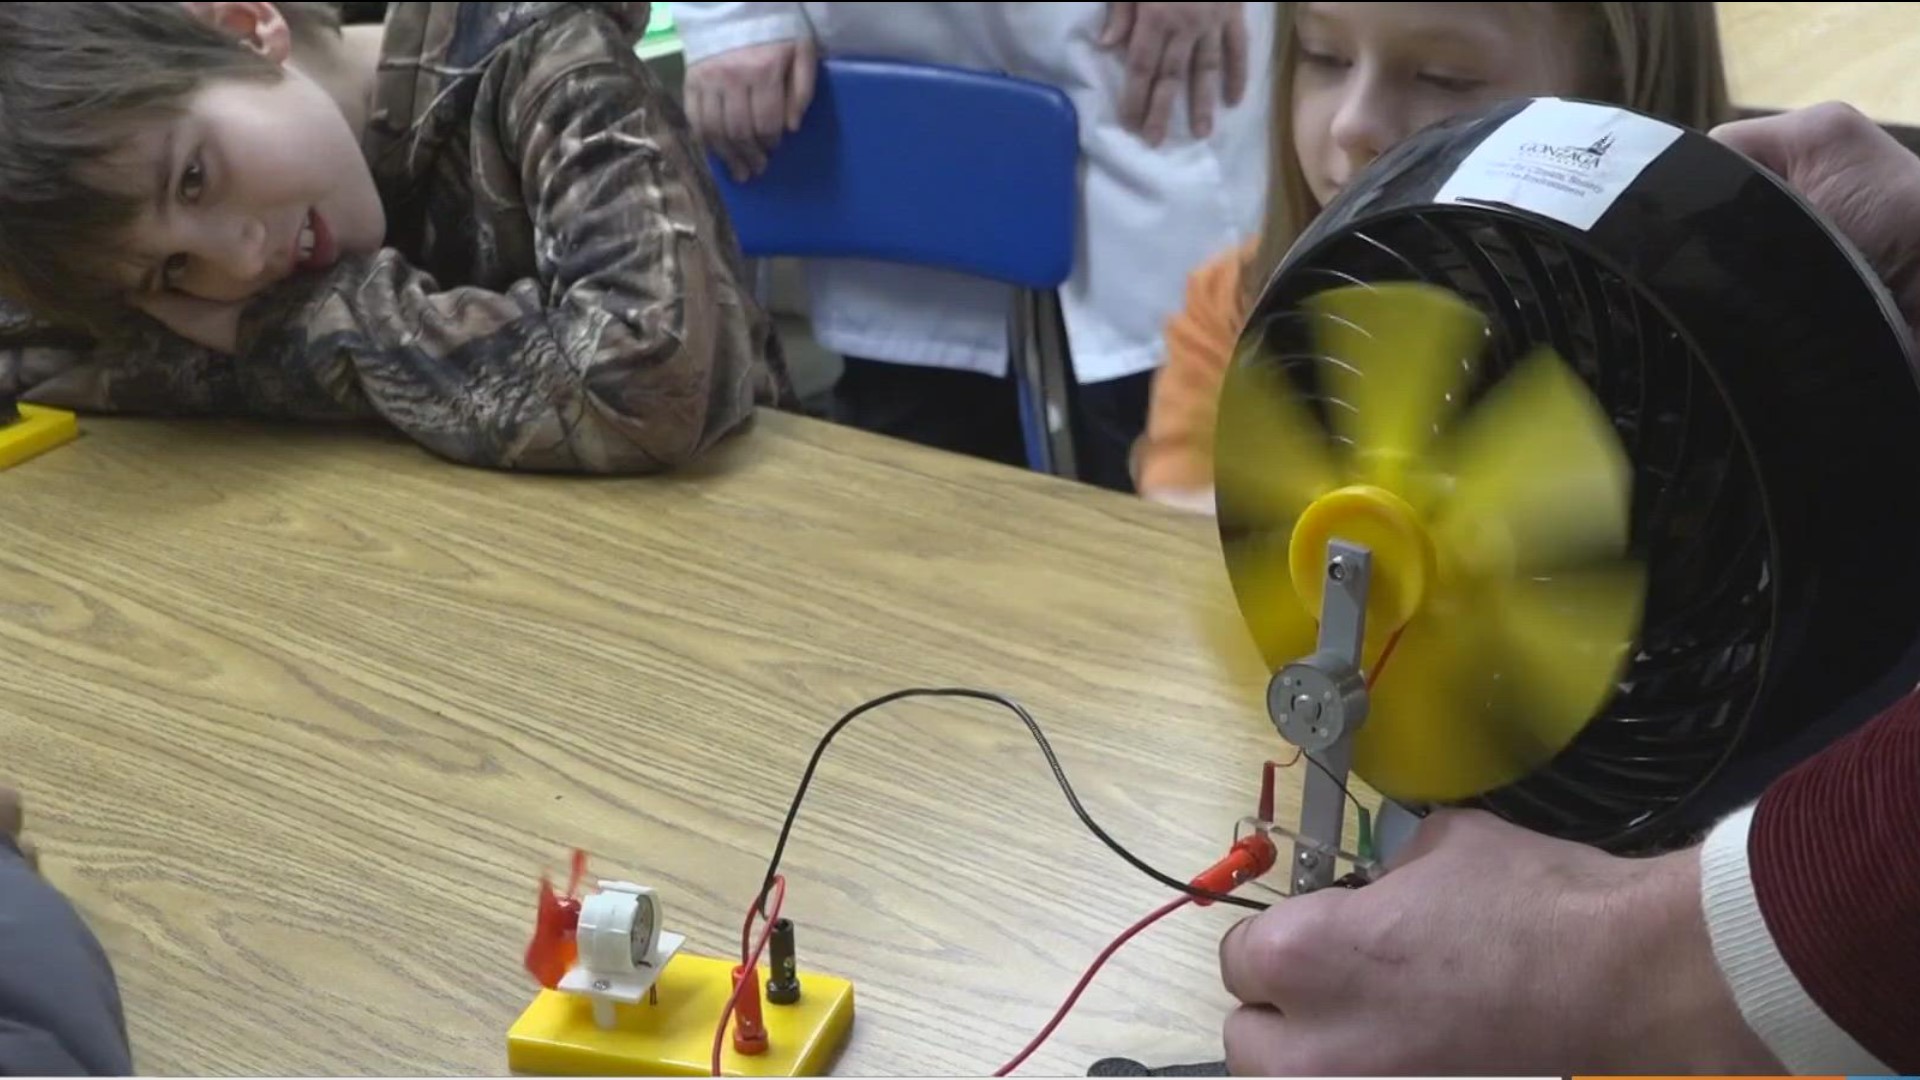 Spokane Public School students are using interactive boxes for hands on science lessons.